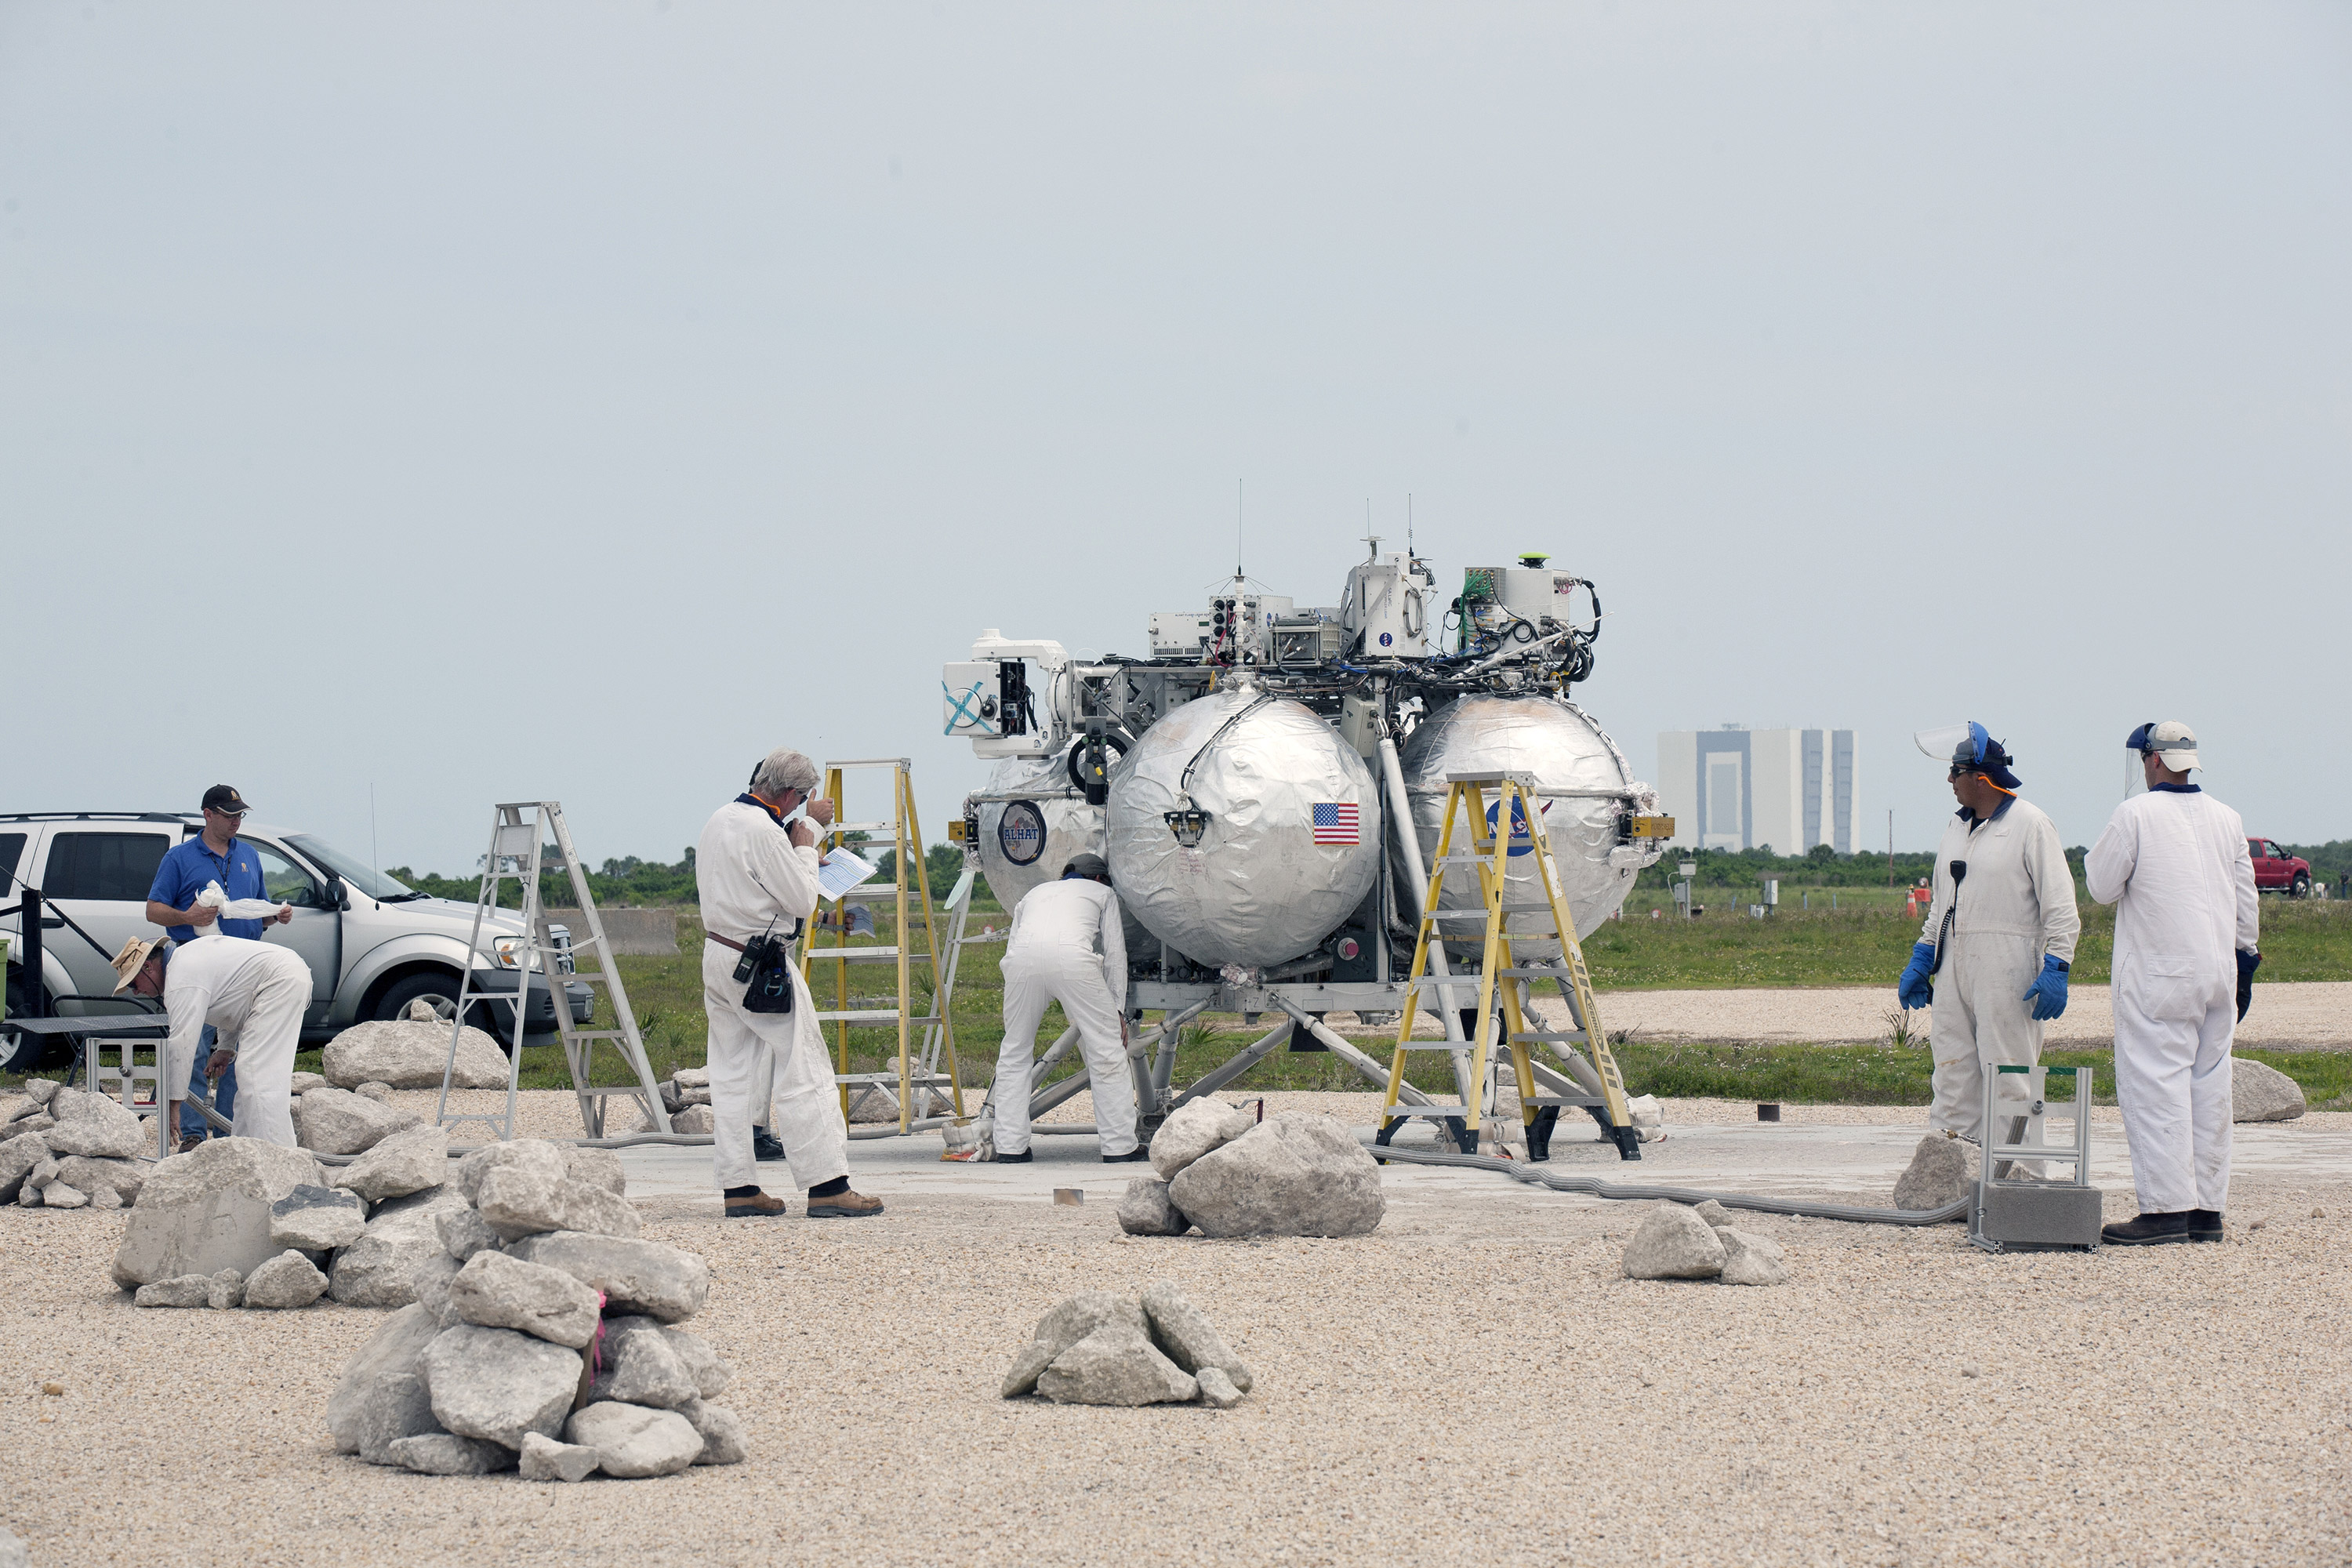 Engineers and technicians check the Project Morpheus prototype lander after it touched down on a dedicated landing pad inside the hazard field at the Shuttle Landing Facility at Kennedy Space Center. Morpheus launched on a free-flight test from a new launch pad at the north end of the facility. Credit: NASA/Kim Shiflett